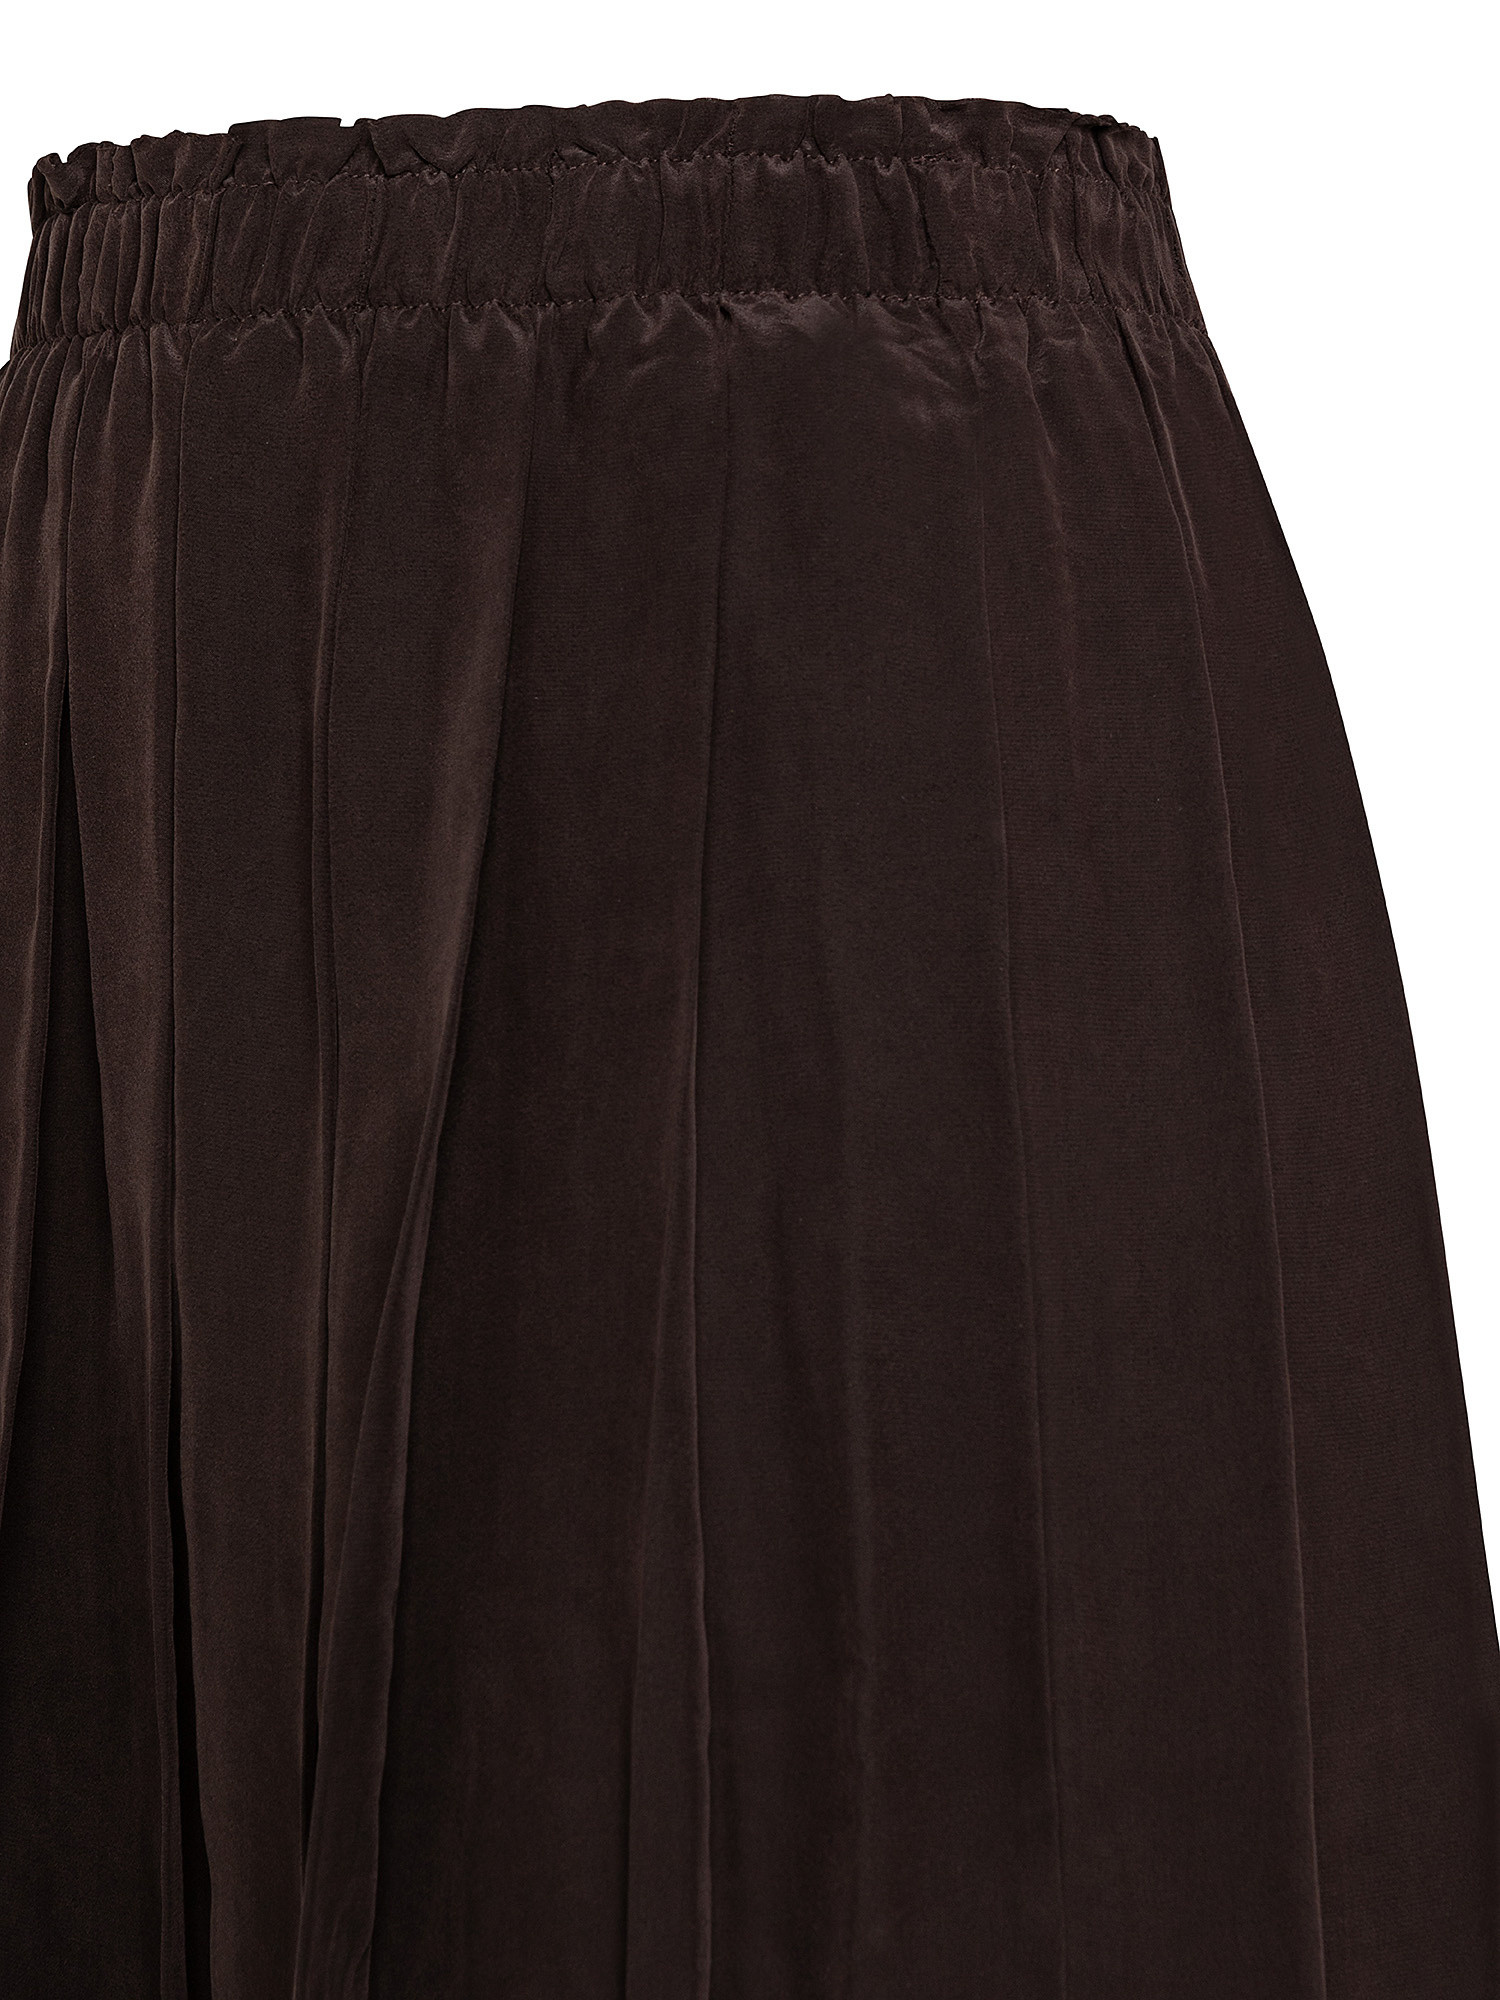 Pleated mini skirt in viscose, Brown, large image number 2